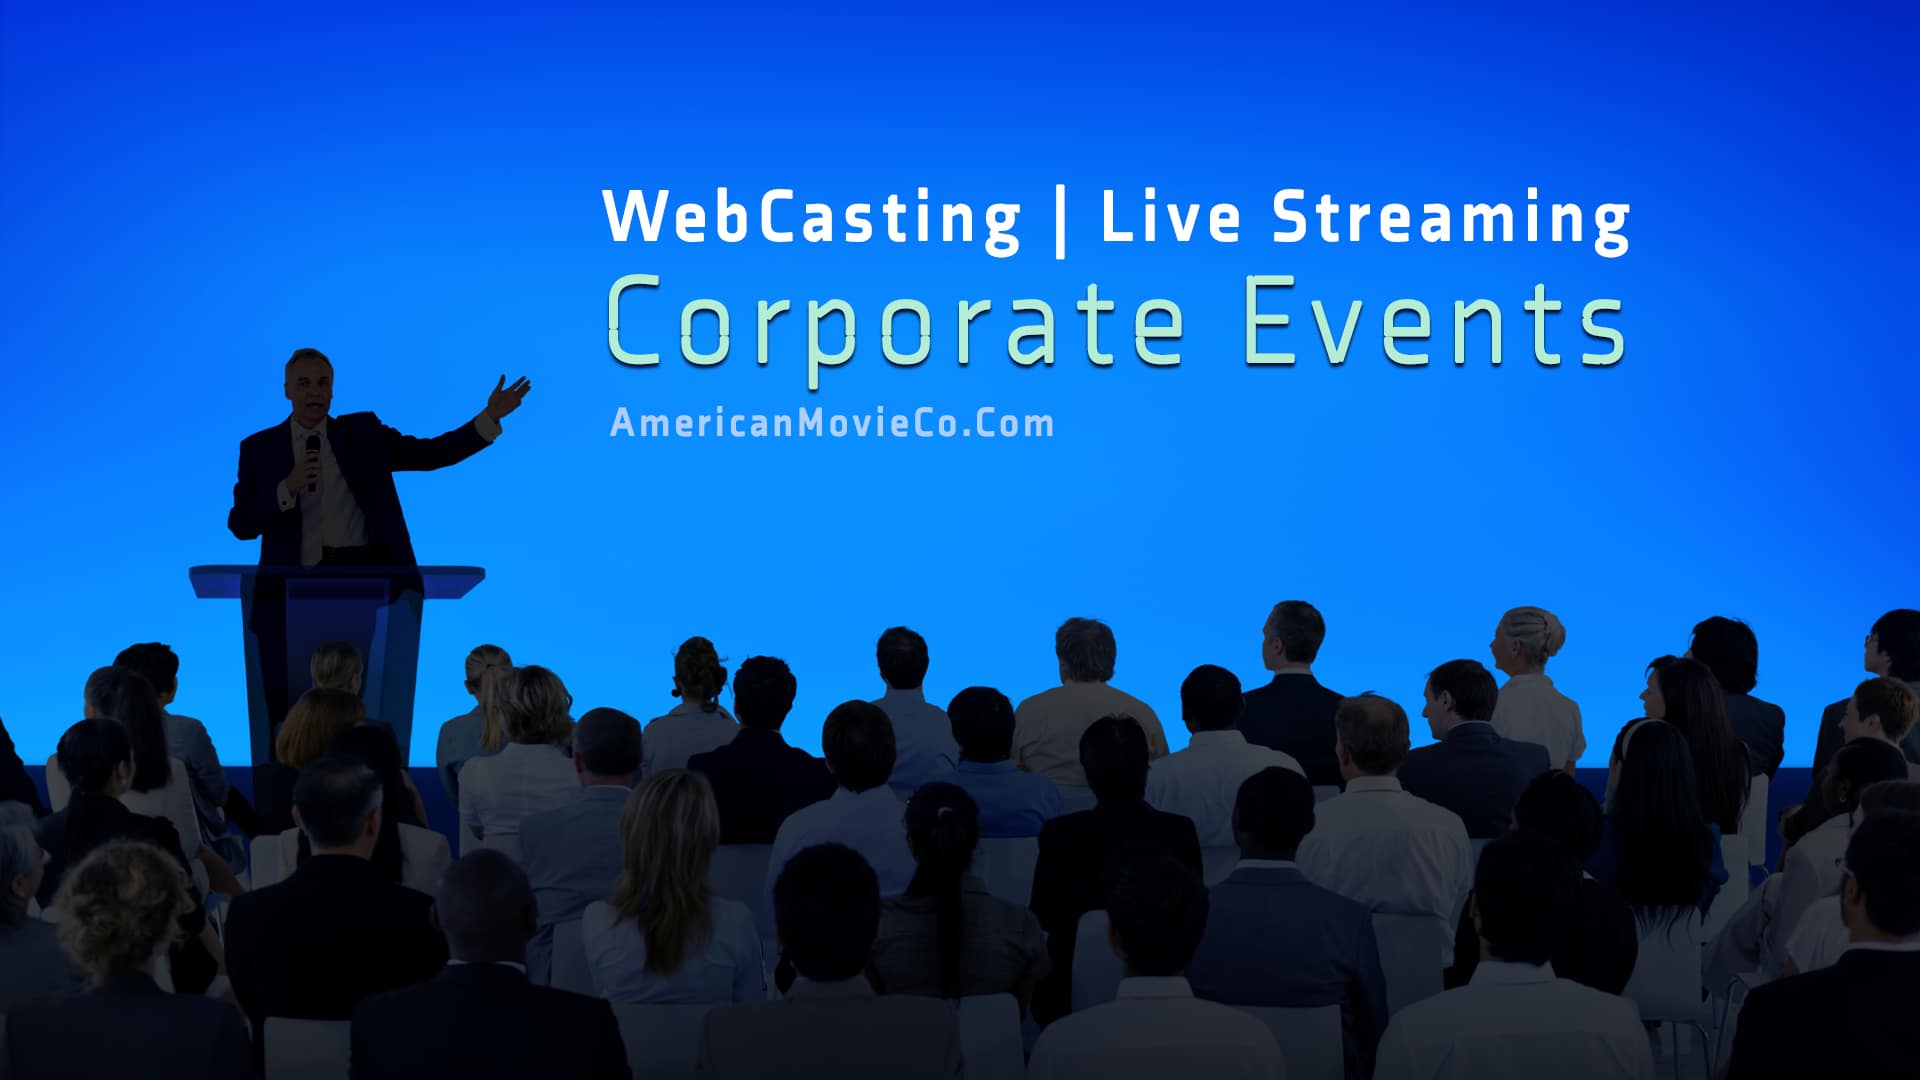 Live streaming your corporate events